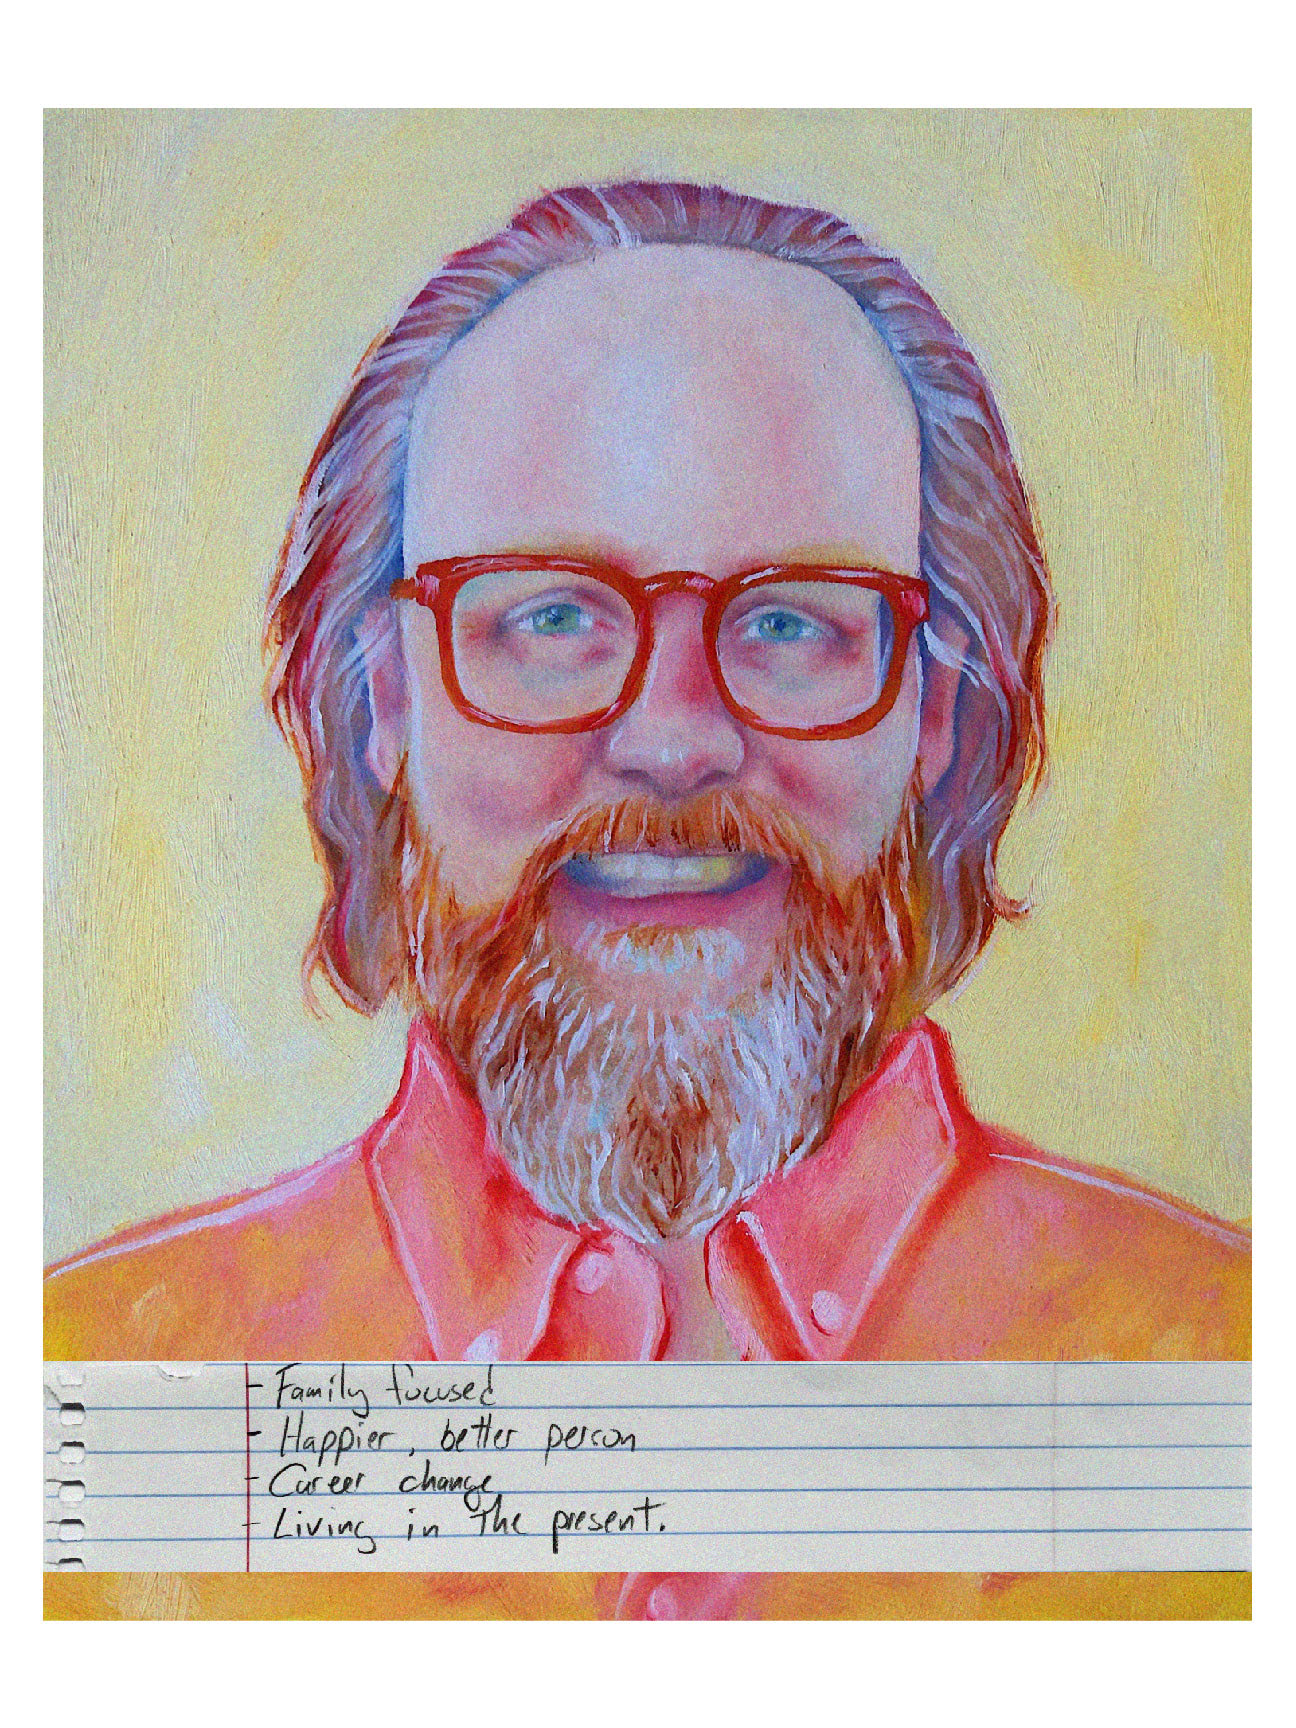 A painting of my dad, a man with a red beard and glasses, looking straight at the viewer with a bright and happy look on his face.